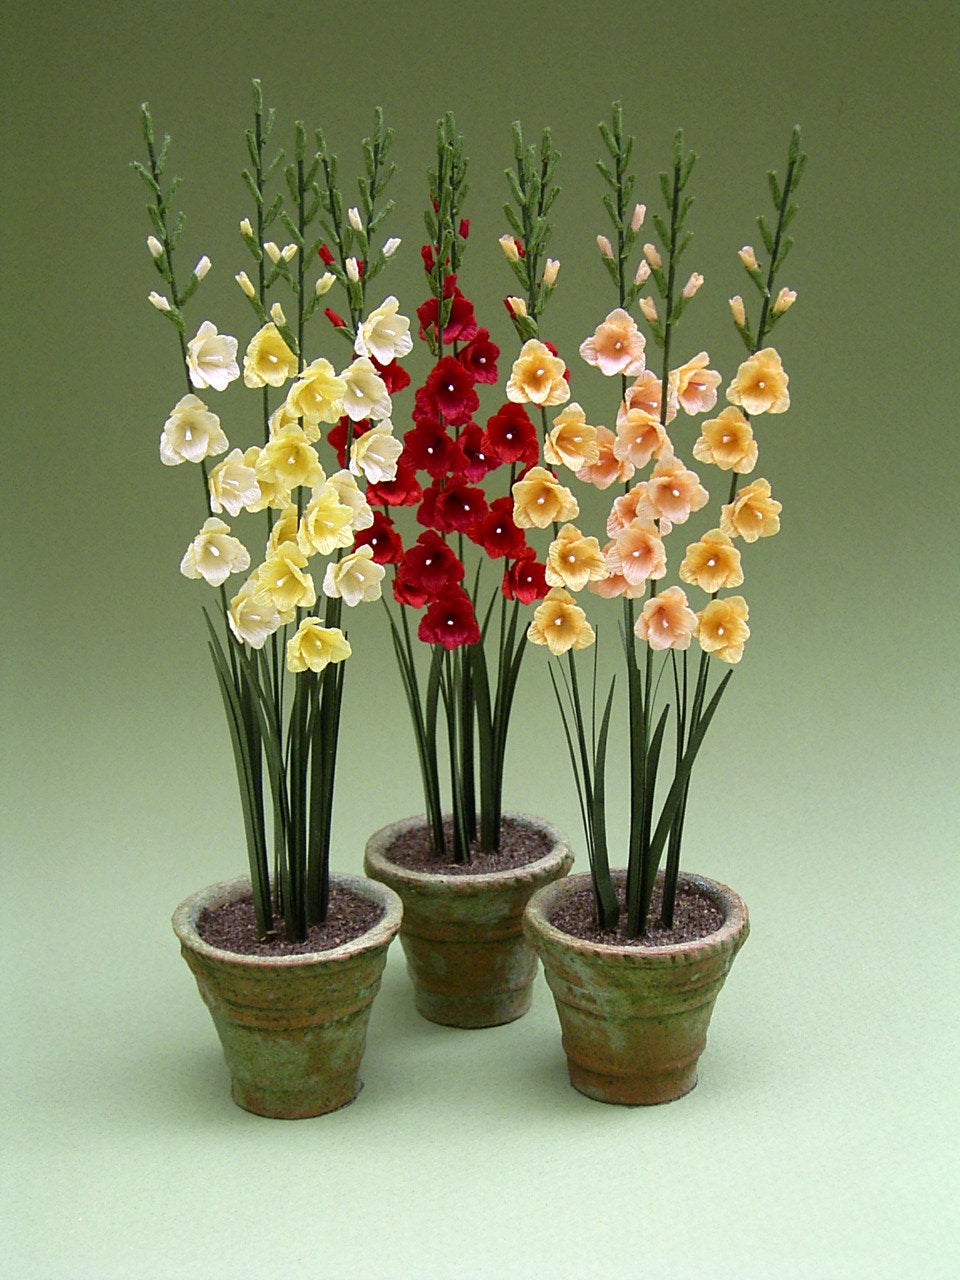 Gladioli Paper Flower Kit  for 1/12th scale Dollhouses, Florists and Miniature Gardens